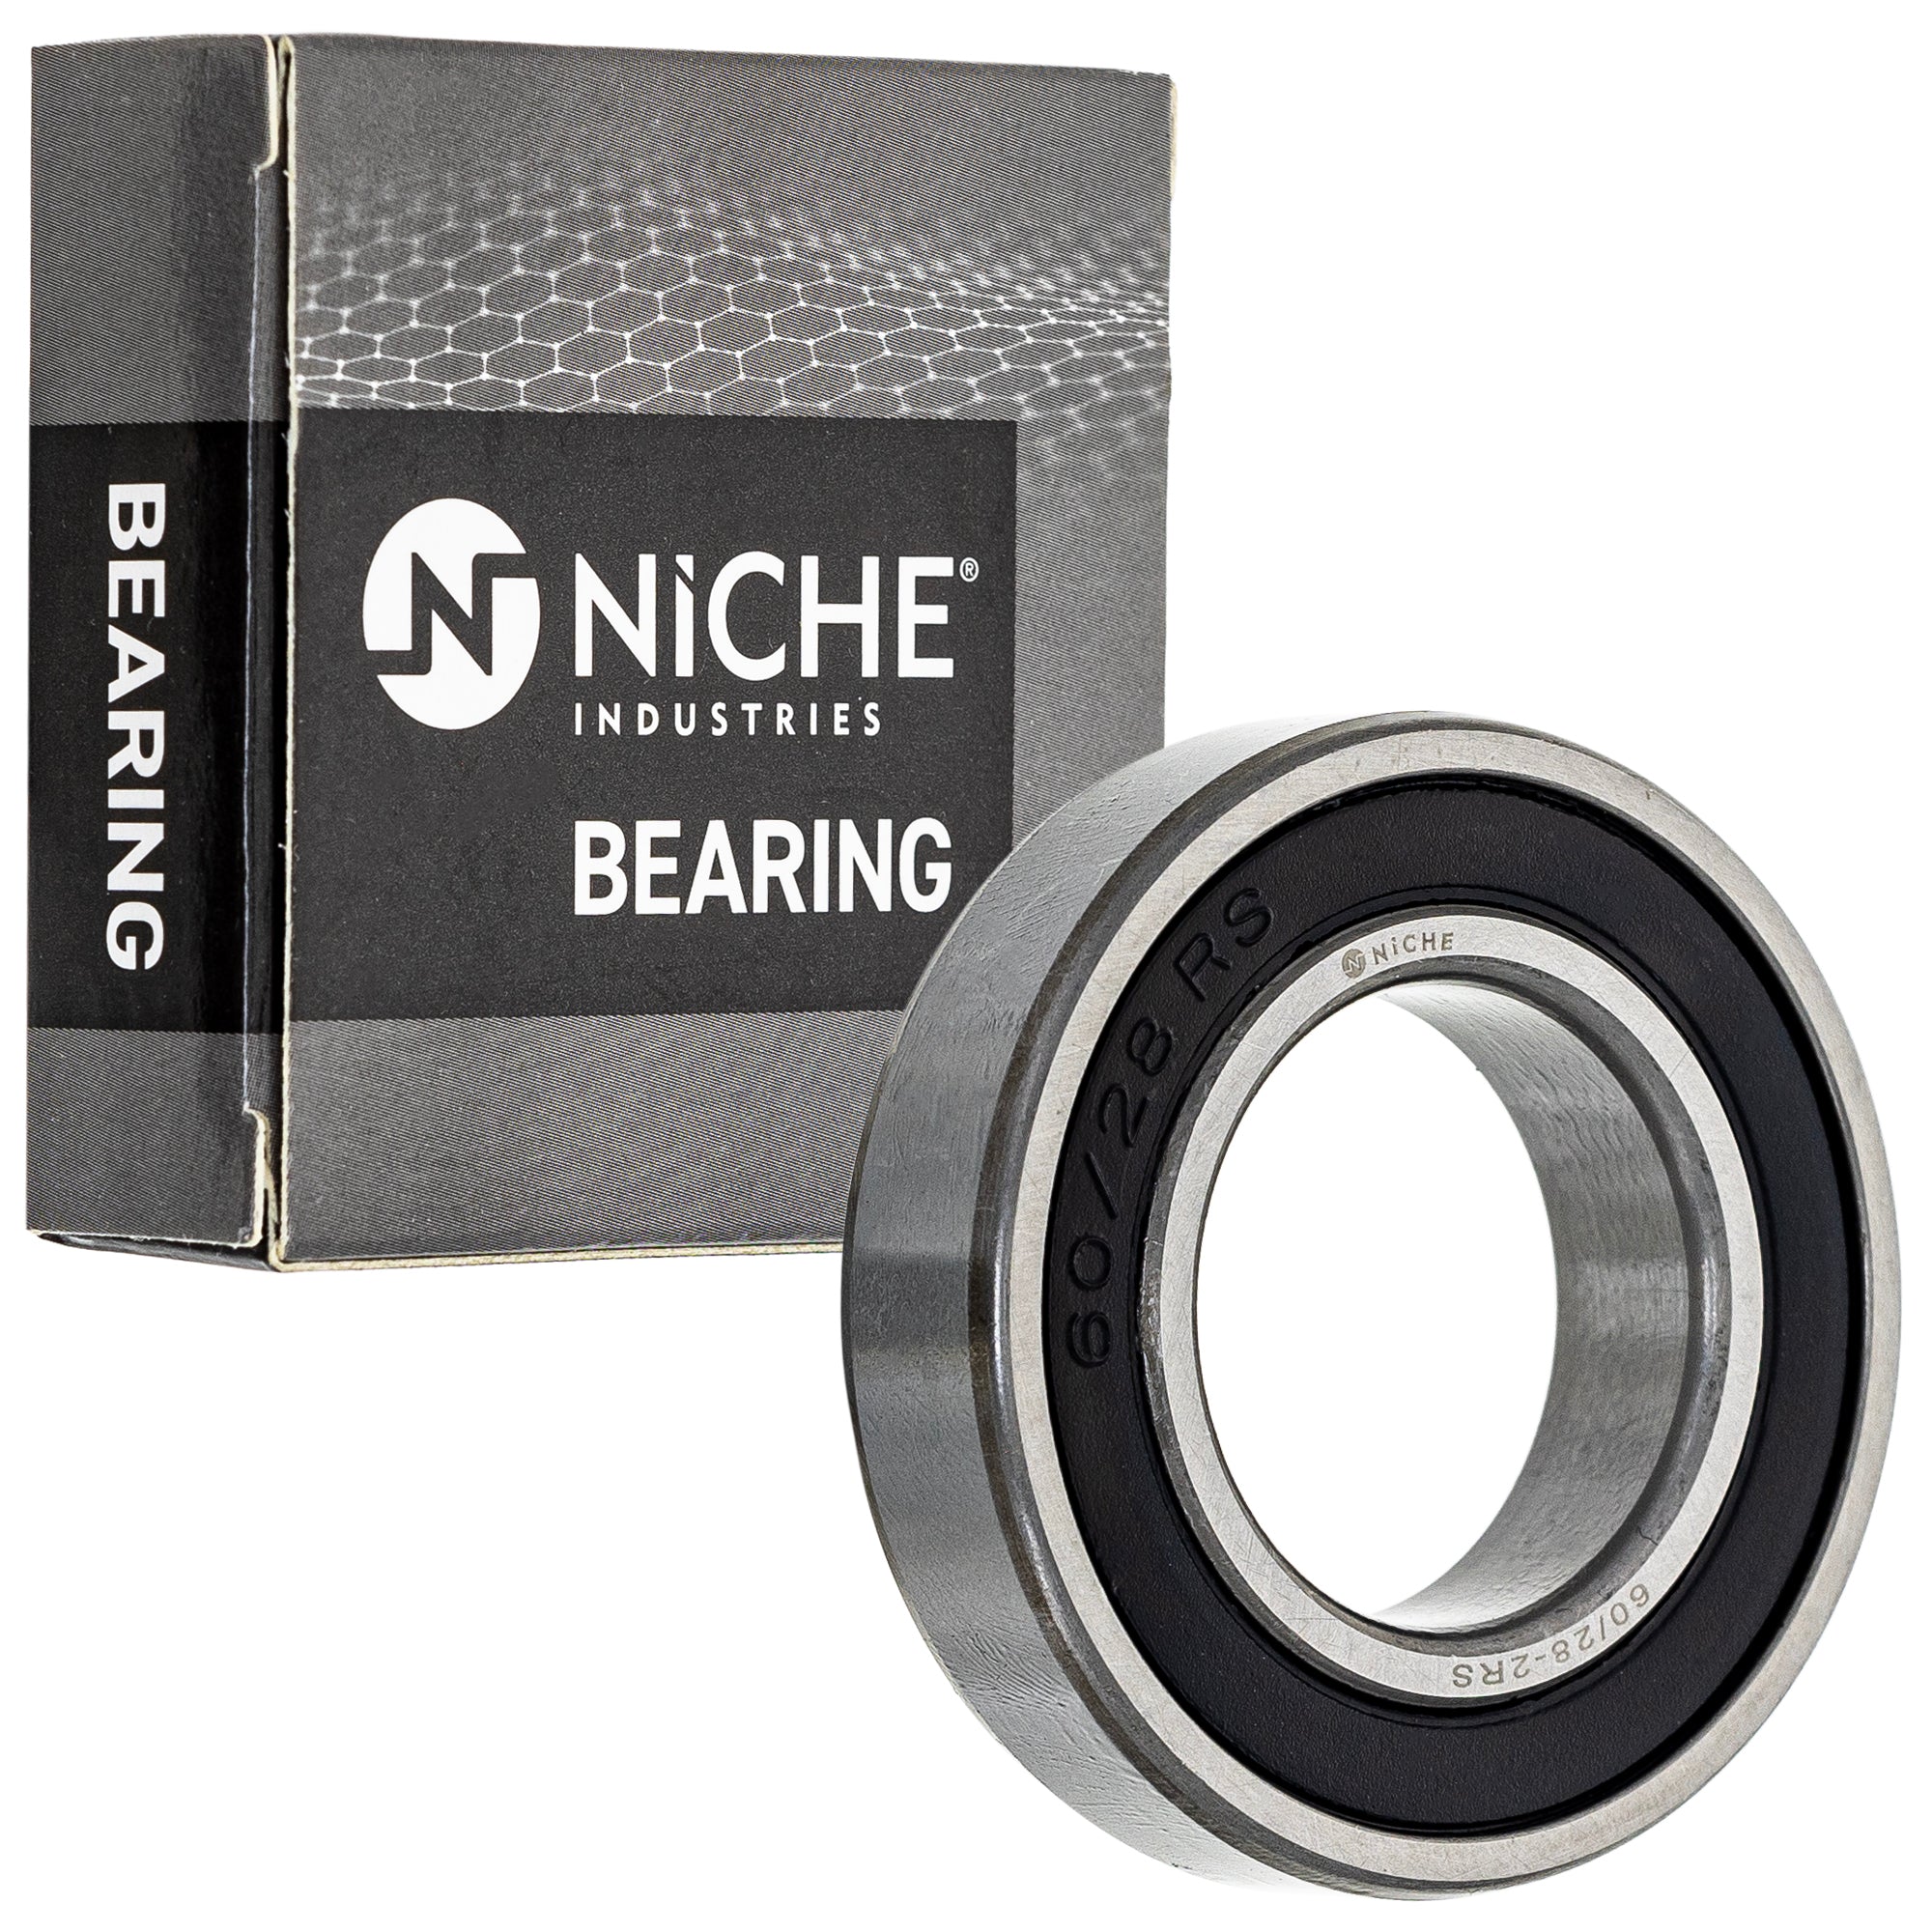 NICHE 519-CBB2264R Bearing 10-Pack for zOTHER Stateline Sabre